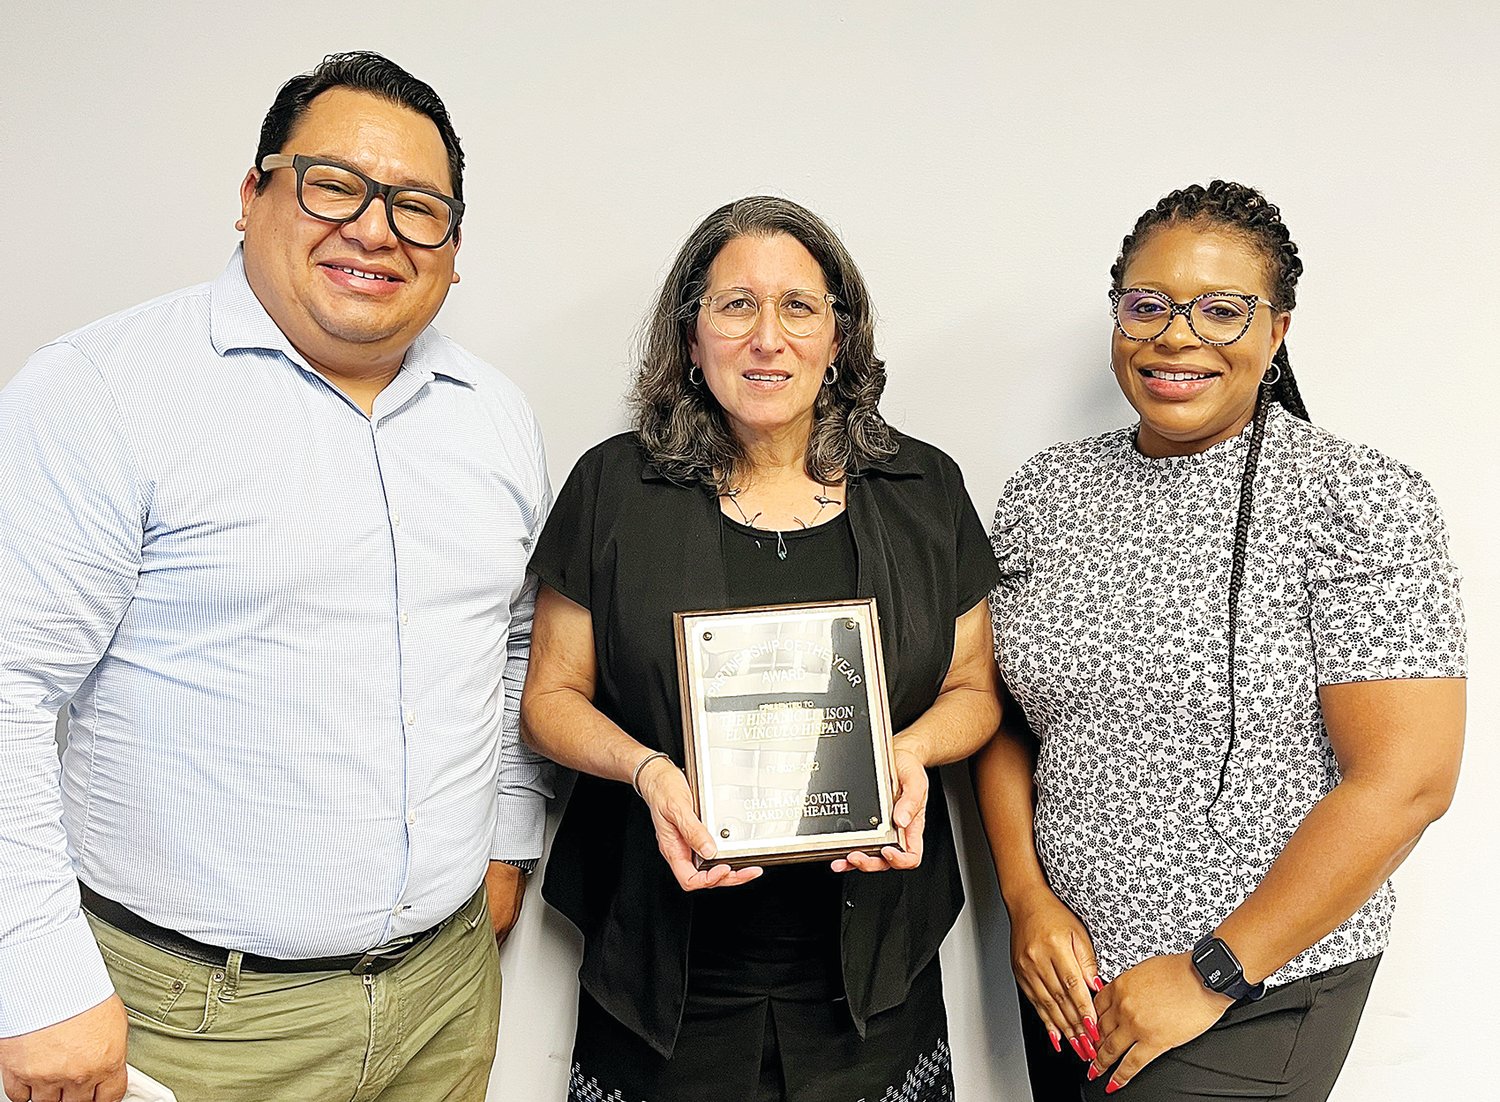 COVID-19 Project Manager Will Mendoza, left, and Executive Director Ilana Dubester, center, received the 2021-22 Community Partner of the Year Award from the Chatham County Board of Health on May 23. The award was presented by Board of Health Chairperson Dr. Karen Barbee, right.